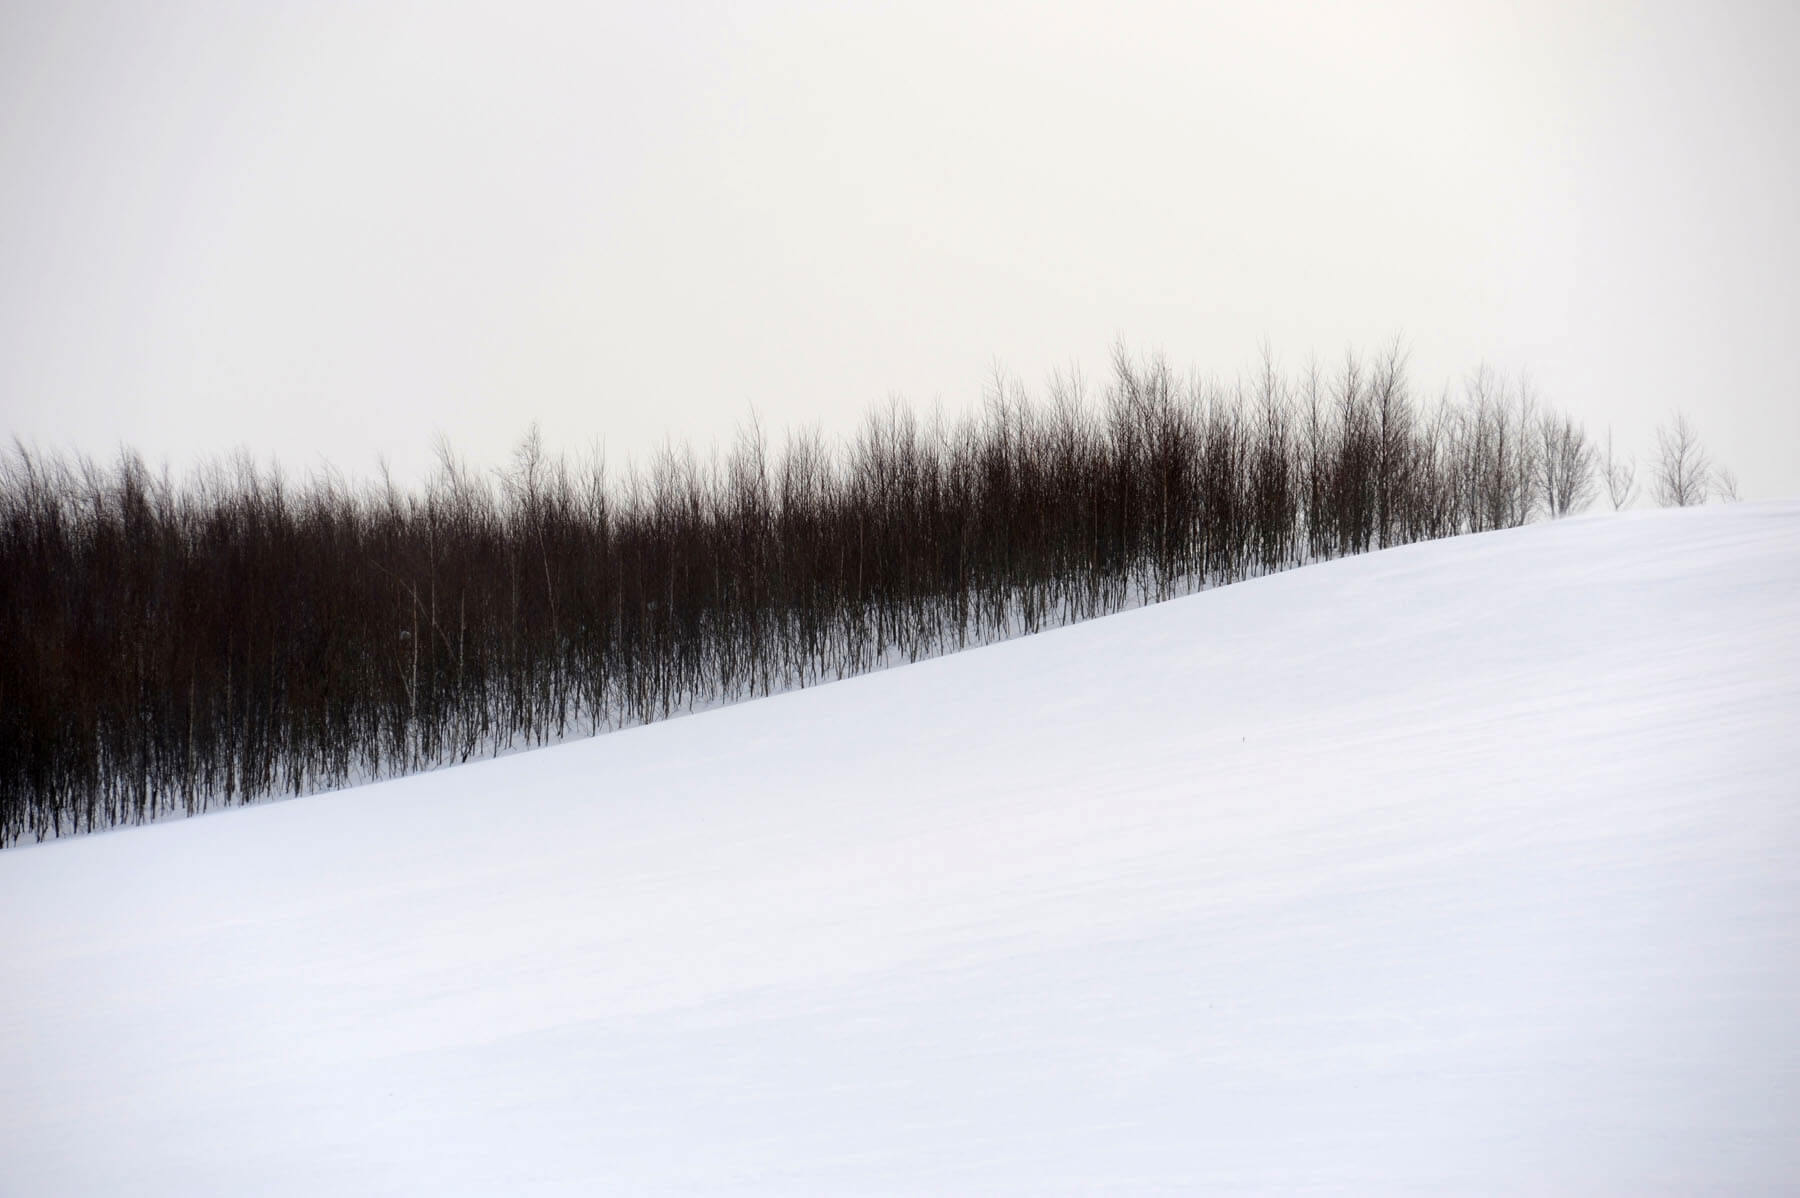 Trees on a hill covered with snow Biei Hokkaido